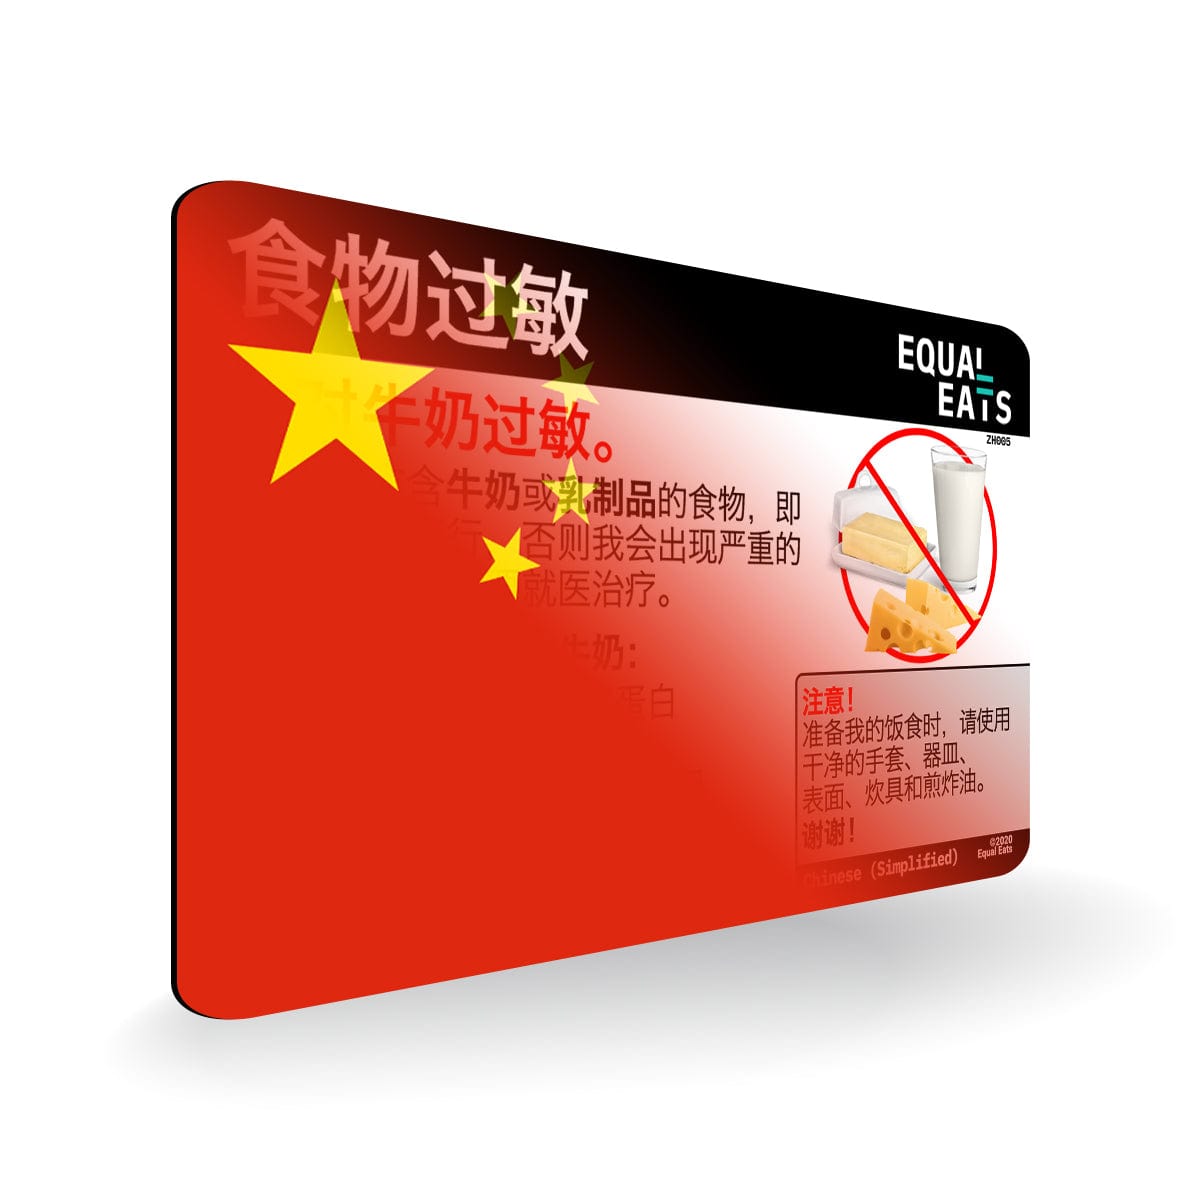 Milk Allergy in Simplified Chinese. Milk Allergy Card for China